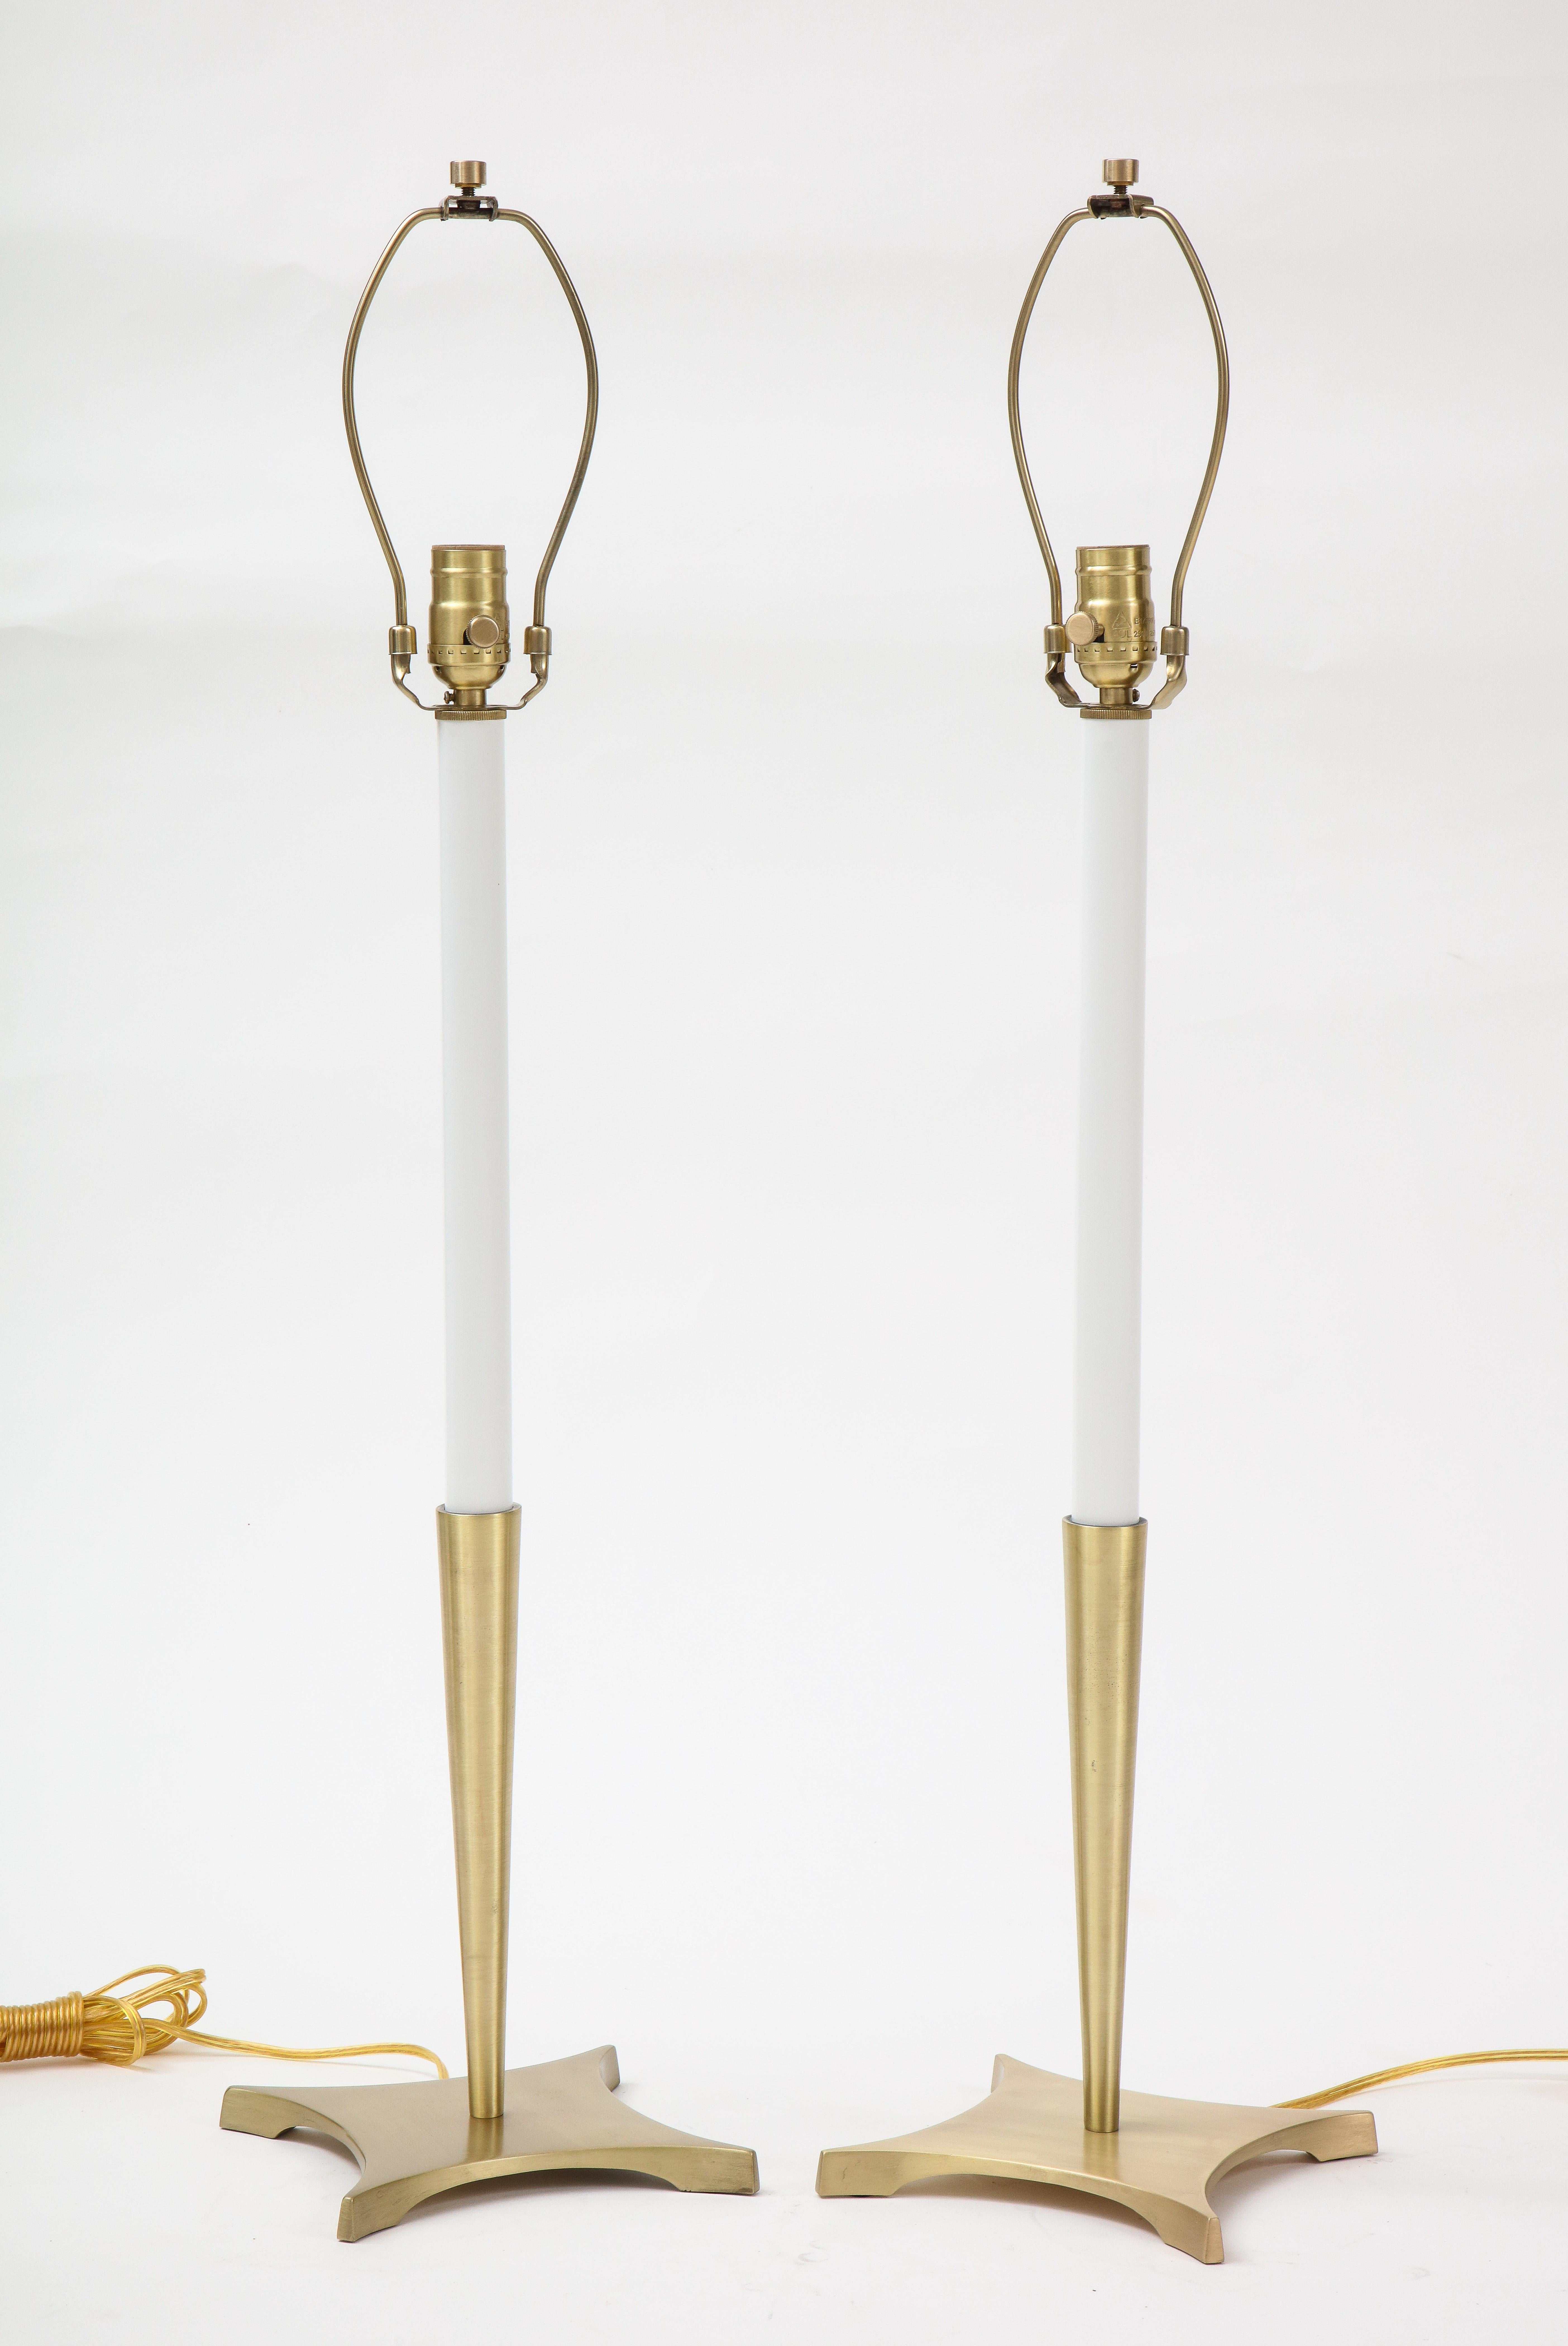 Pair of Midcentury classically styled brushed brass candlestick lamps with enameled centers. Rewired for use in USA, 100W max bulbs.